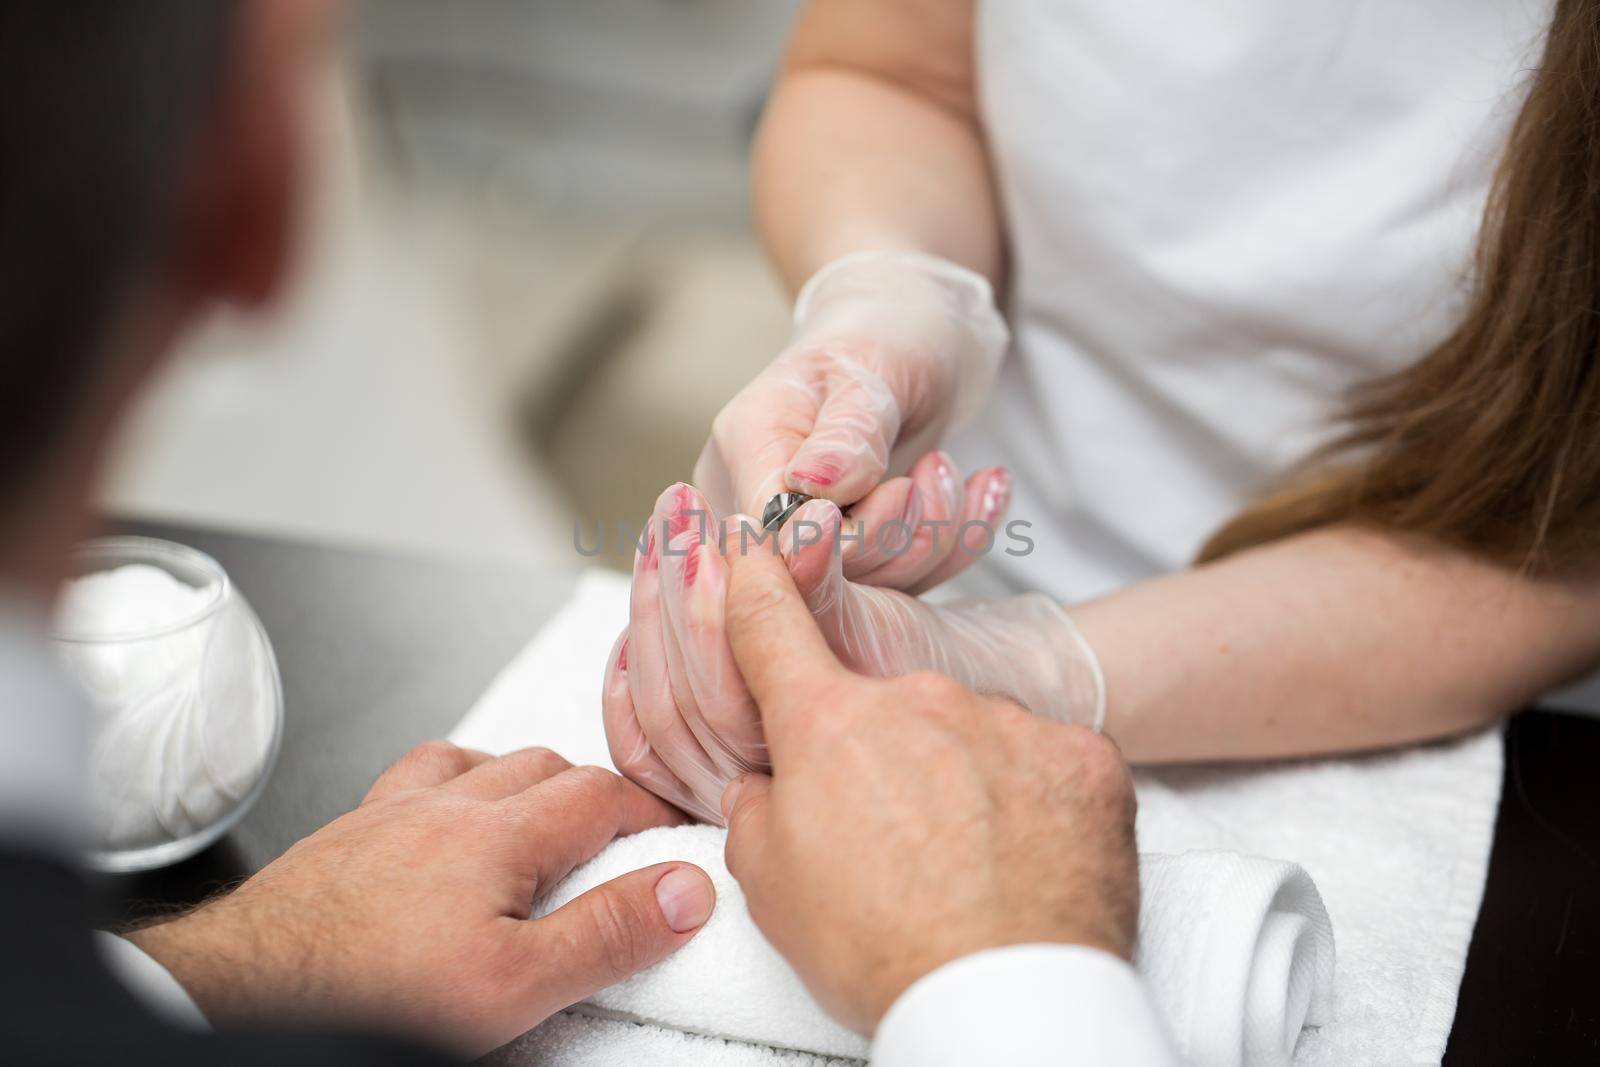 Close-up Of A Manicurist Cutting Off The Cuticle From The Person's Fingers